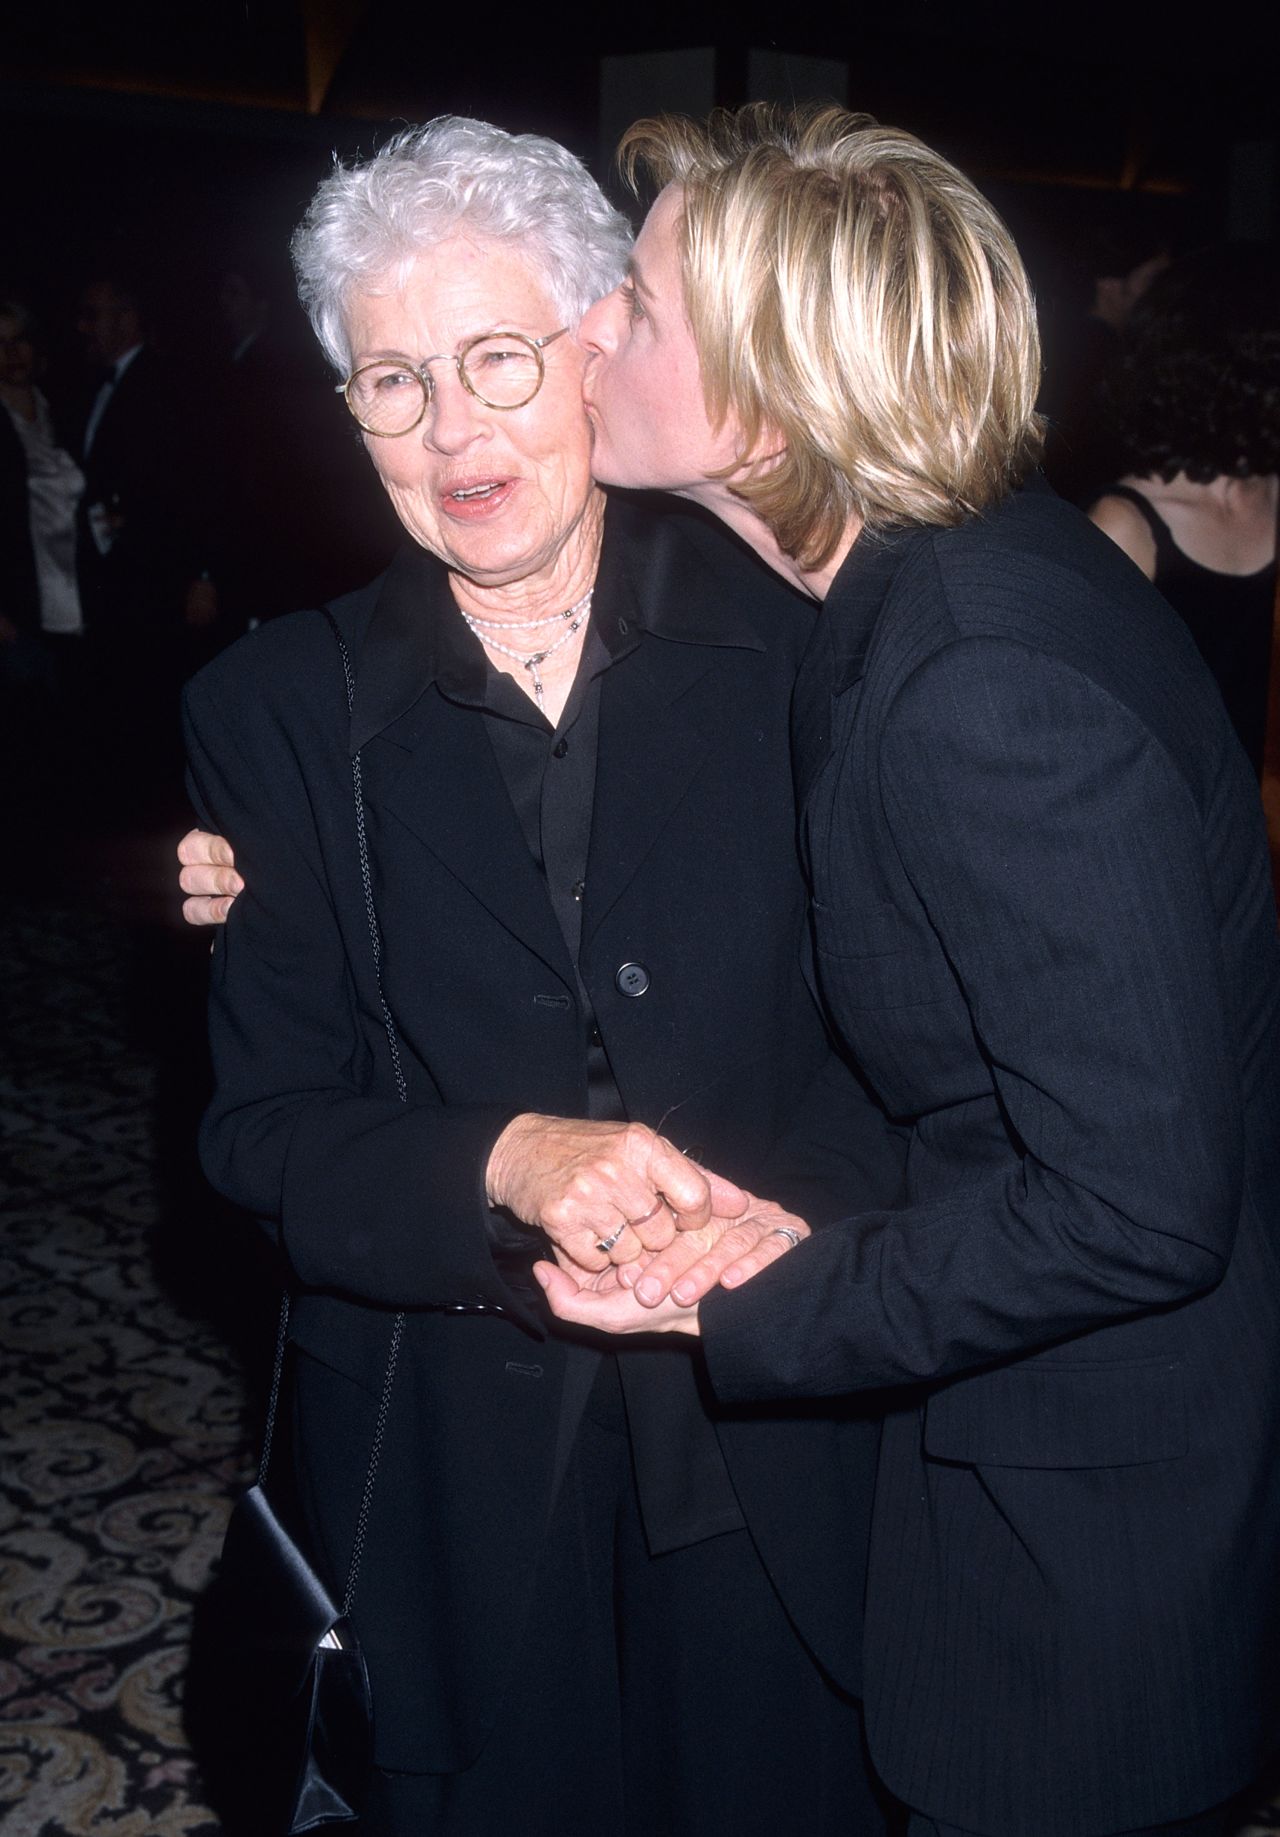 DeGeneres and her mother, Betty, attend the Los Angeles Gay & Lesbian Center's 27th Anniversary Gala in 1998.